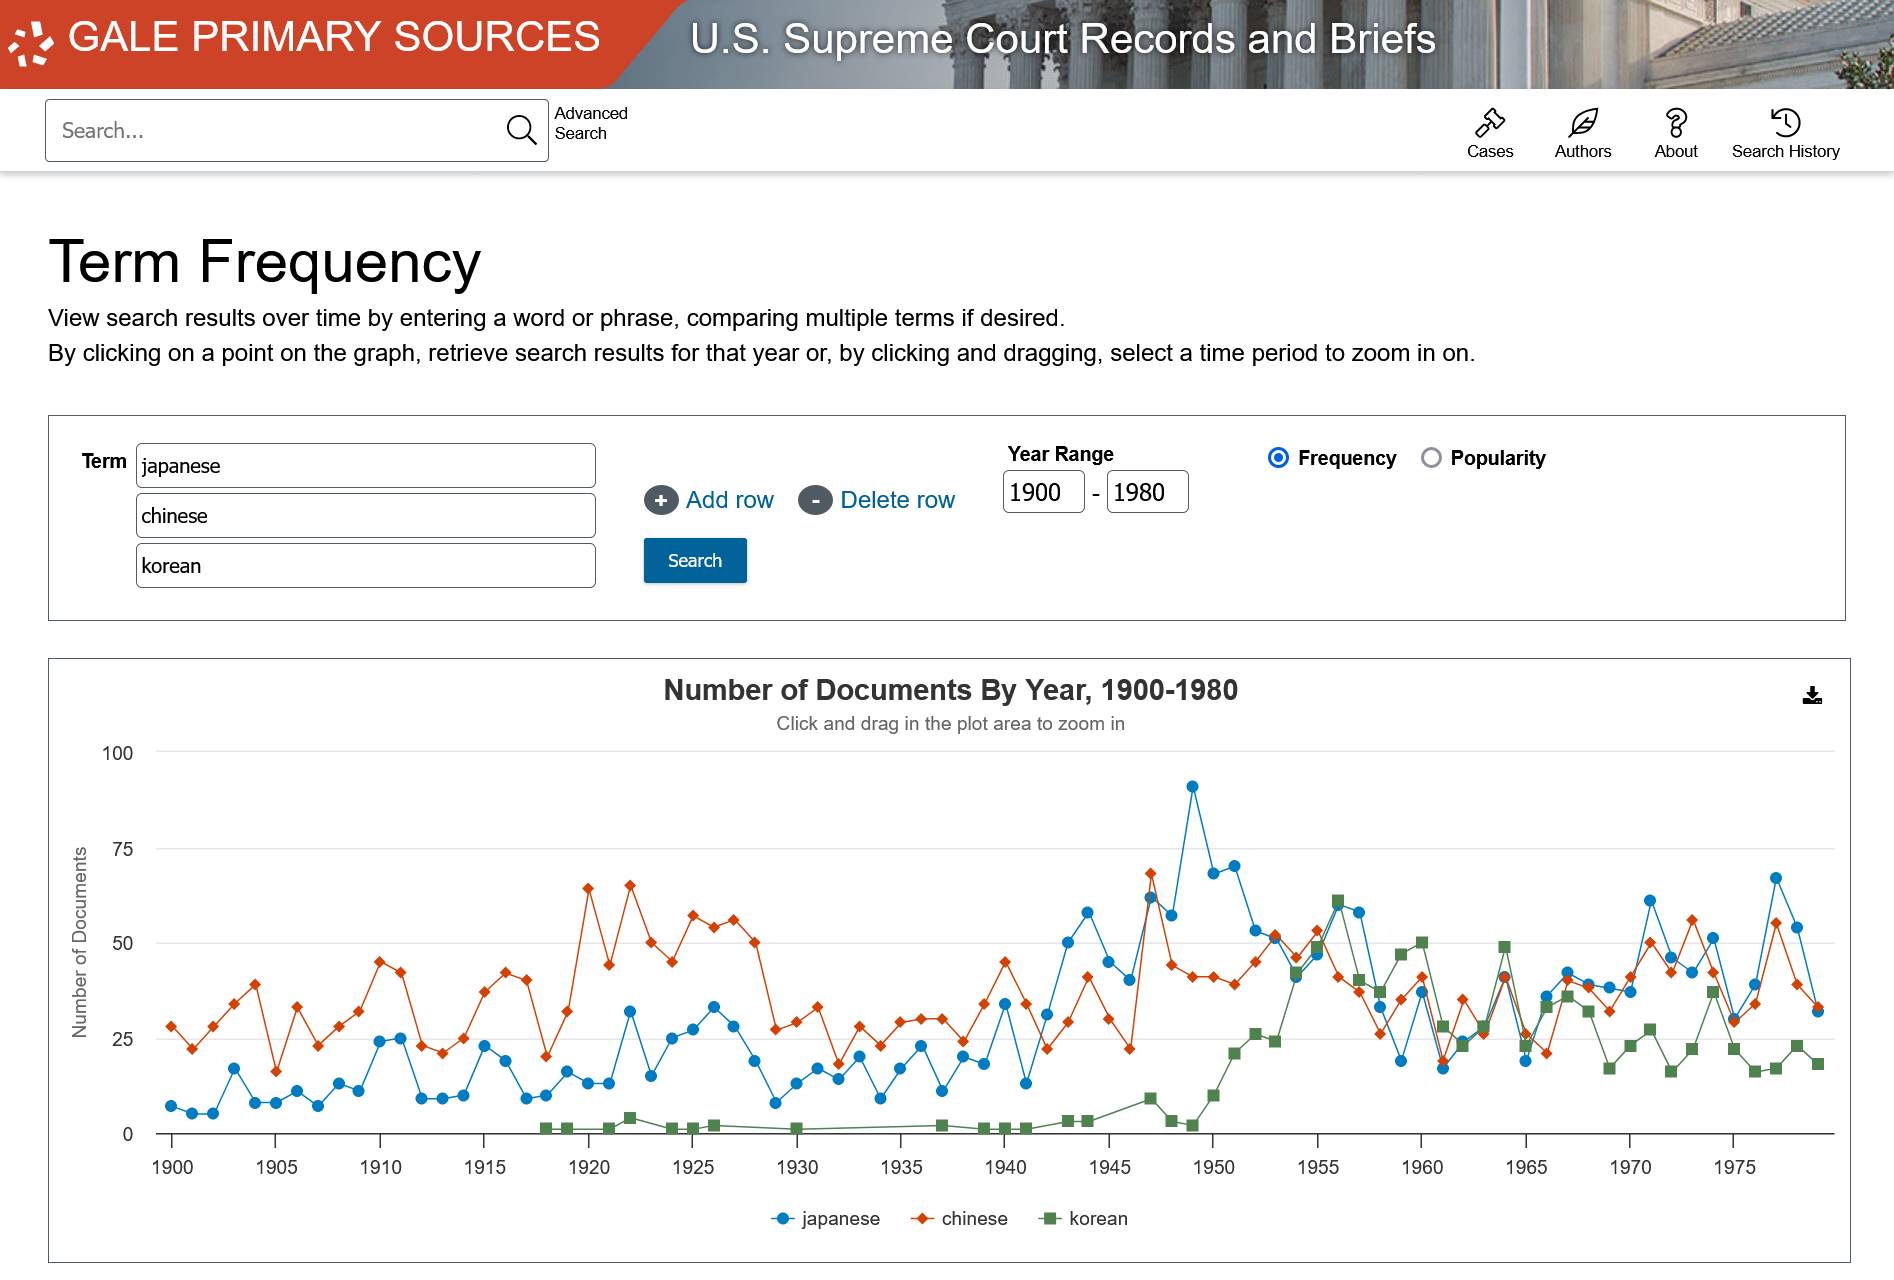 The Making of Modern Law: U.S. Supreme Court Records and Briefs, 1832-1978 のTerm Frequency機能